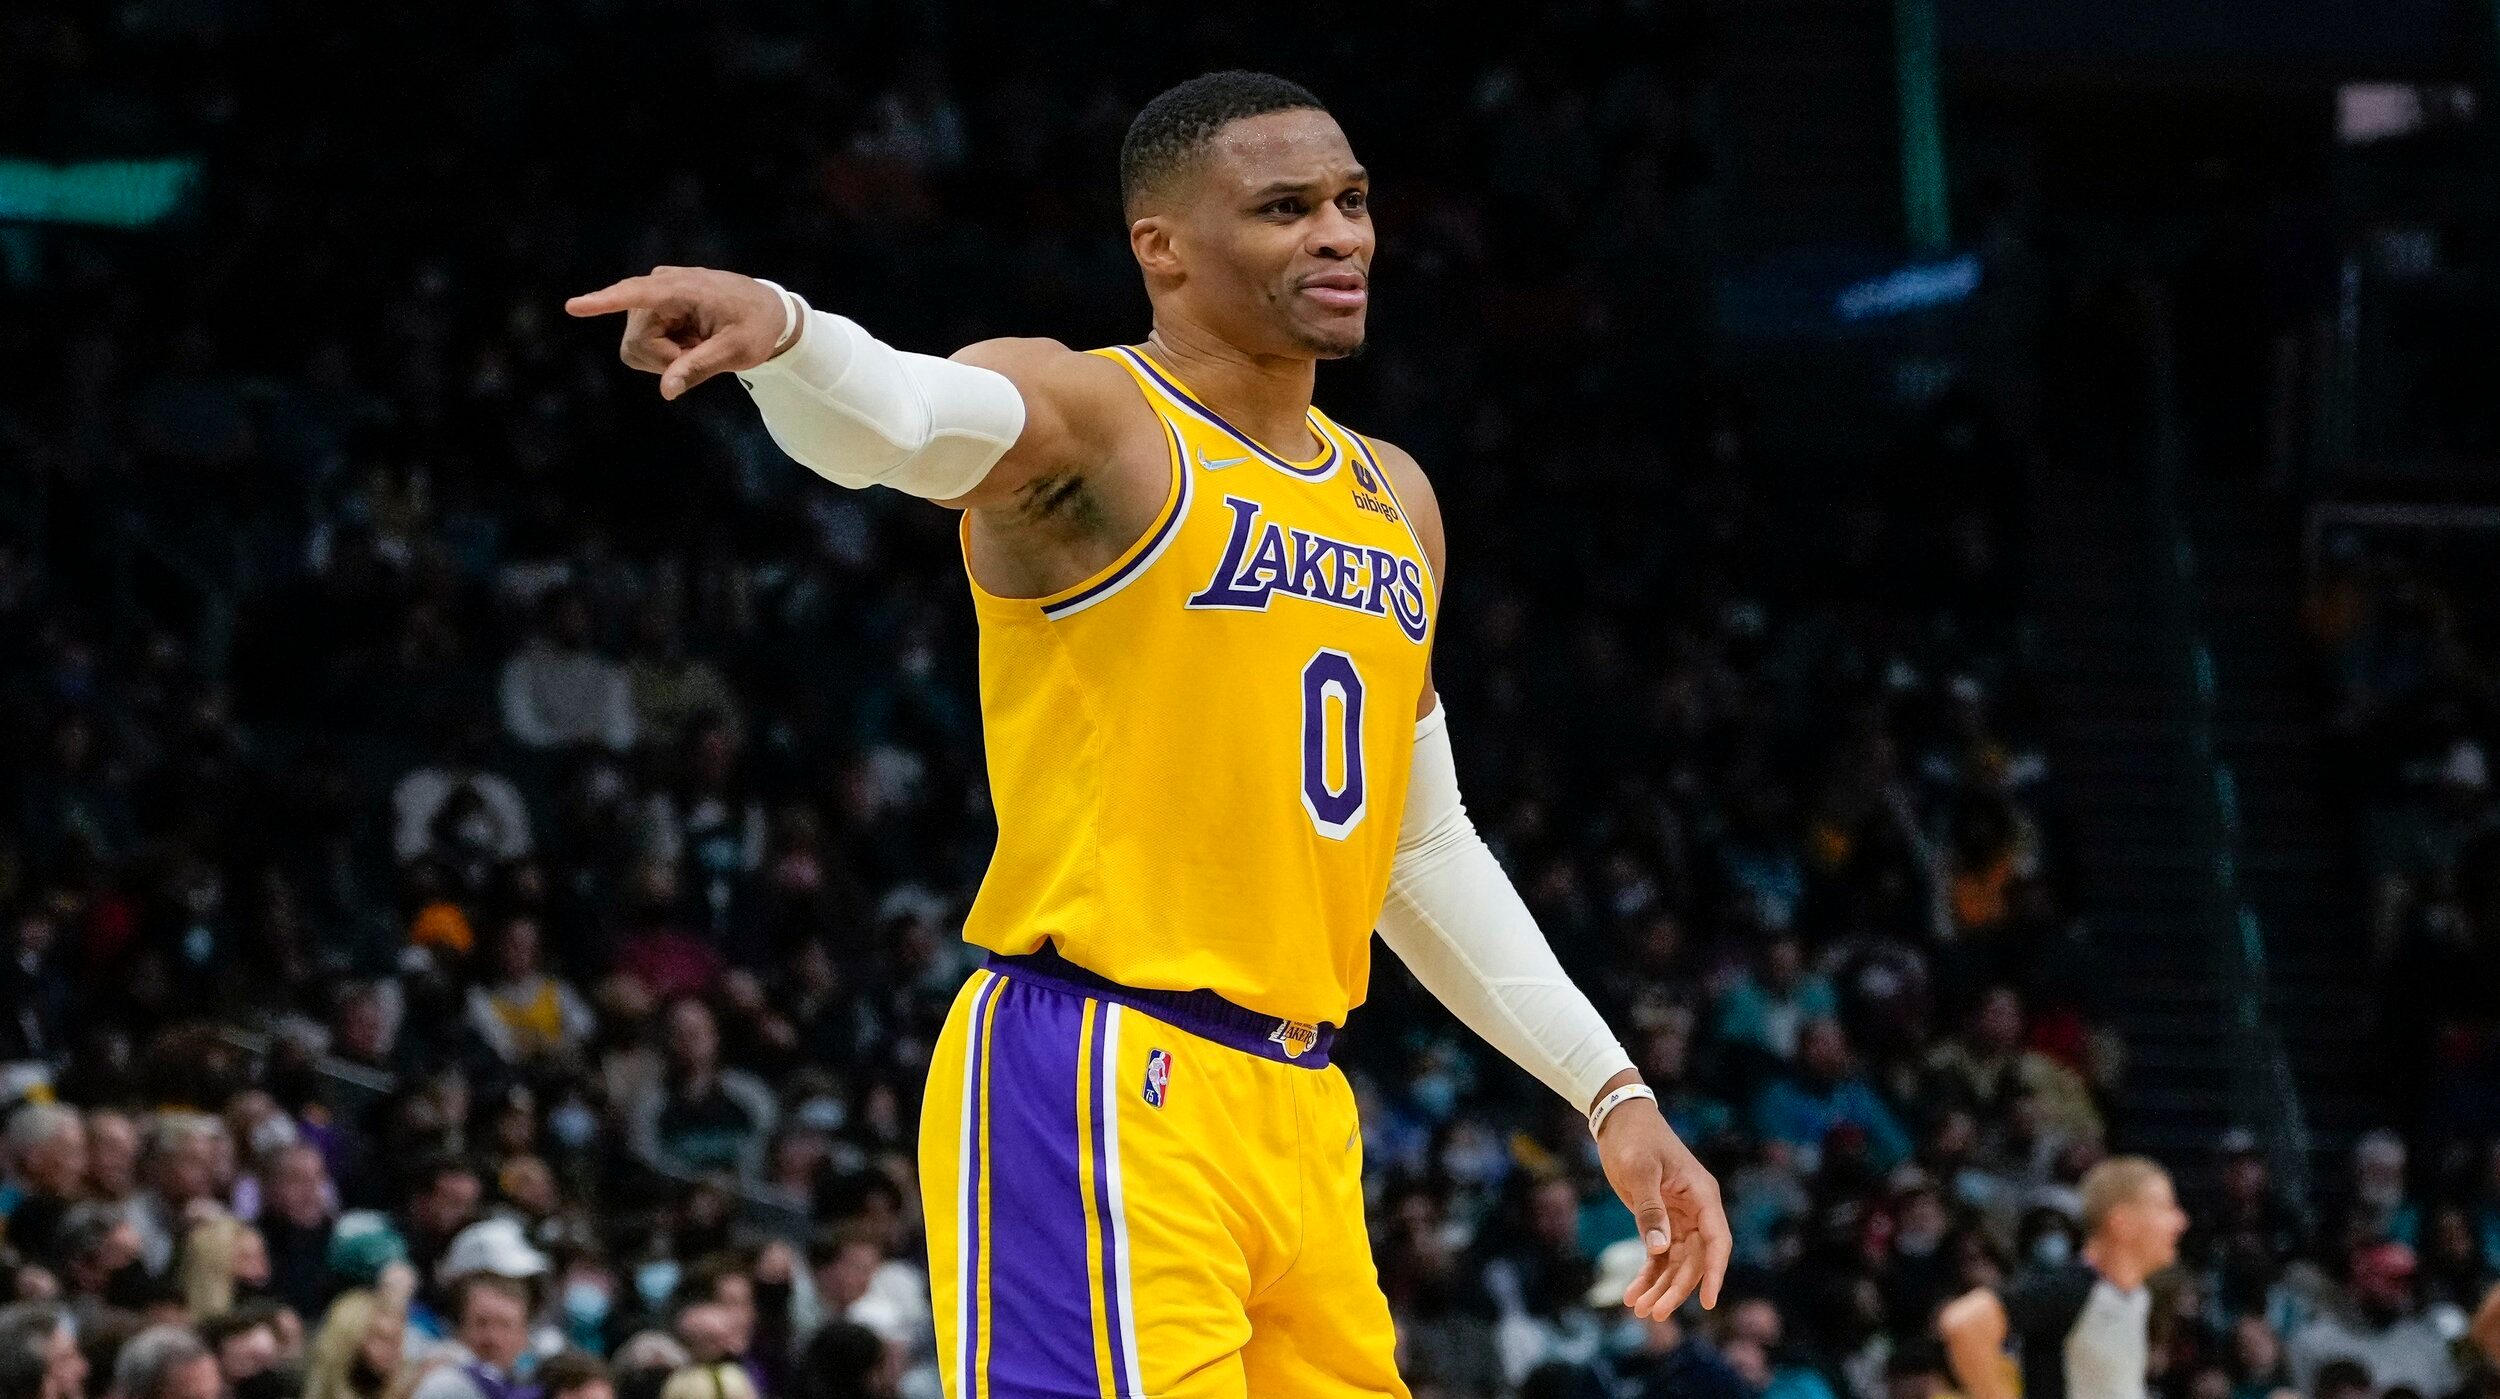 WATCH: Lakers star Russell Westbrook’s savage diss at Timberwolves amid disrespectful matchup